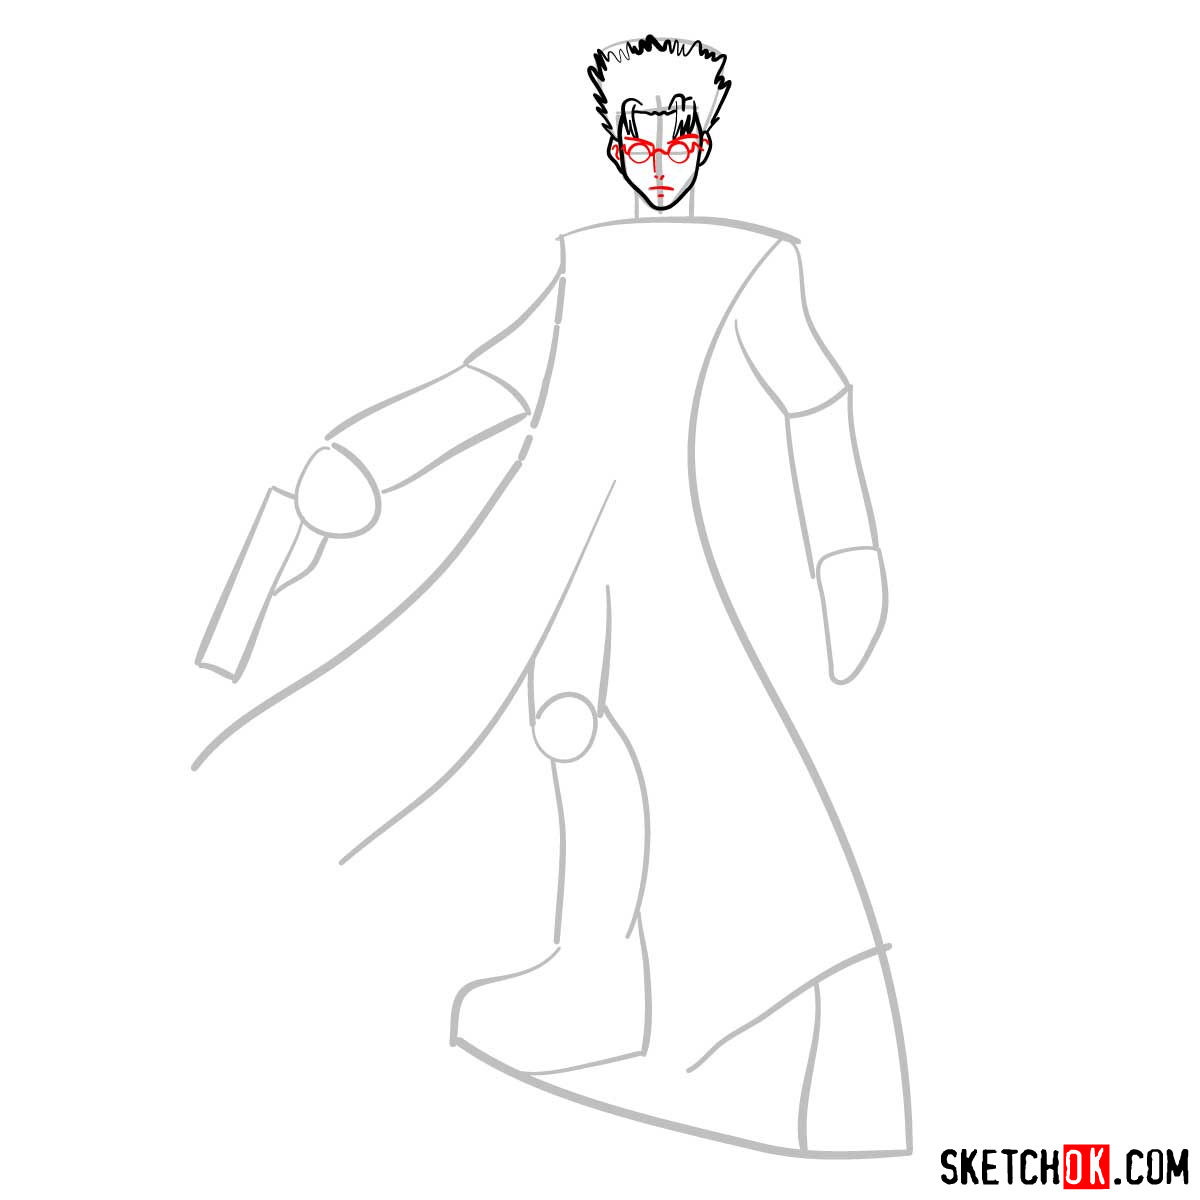 How to draw Vash the Stampede from Trigun anime - step 05